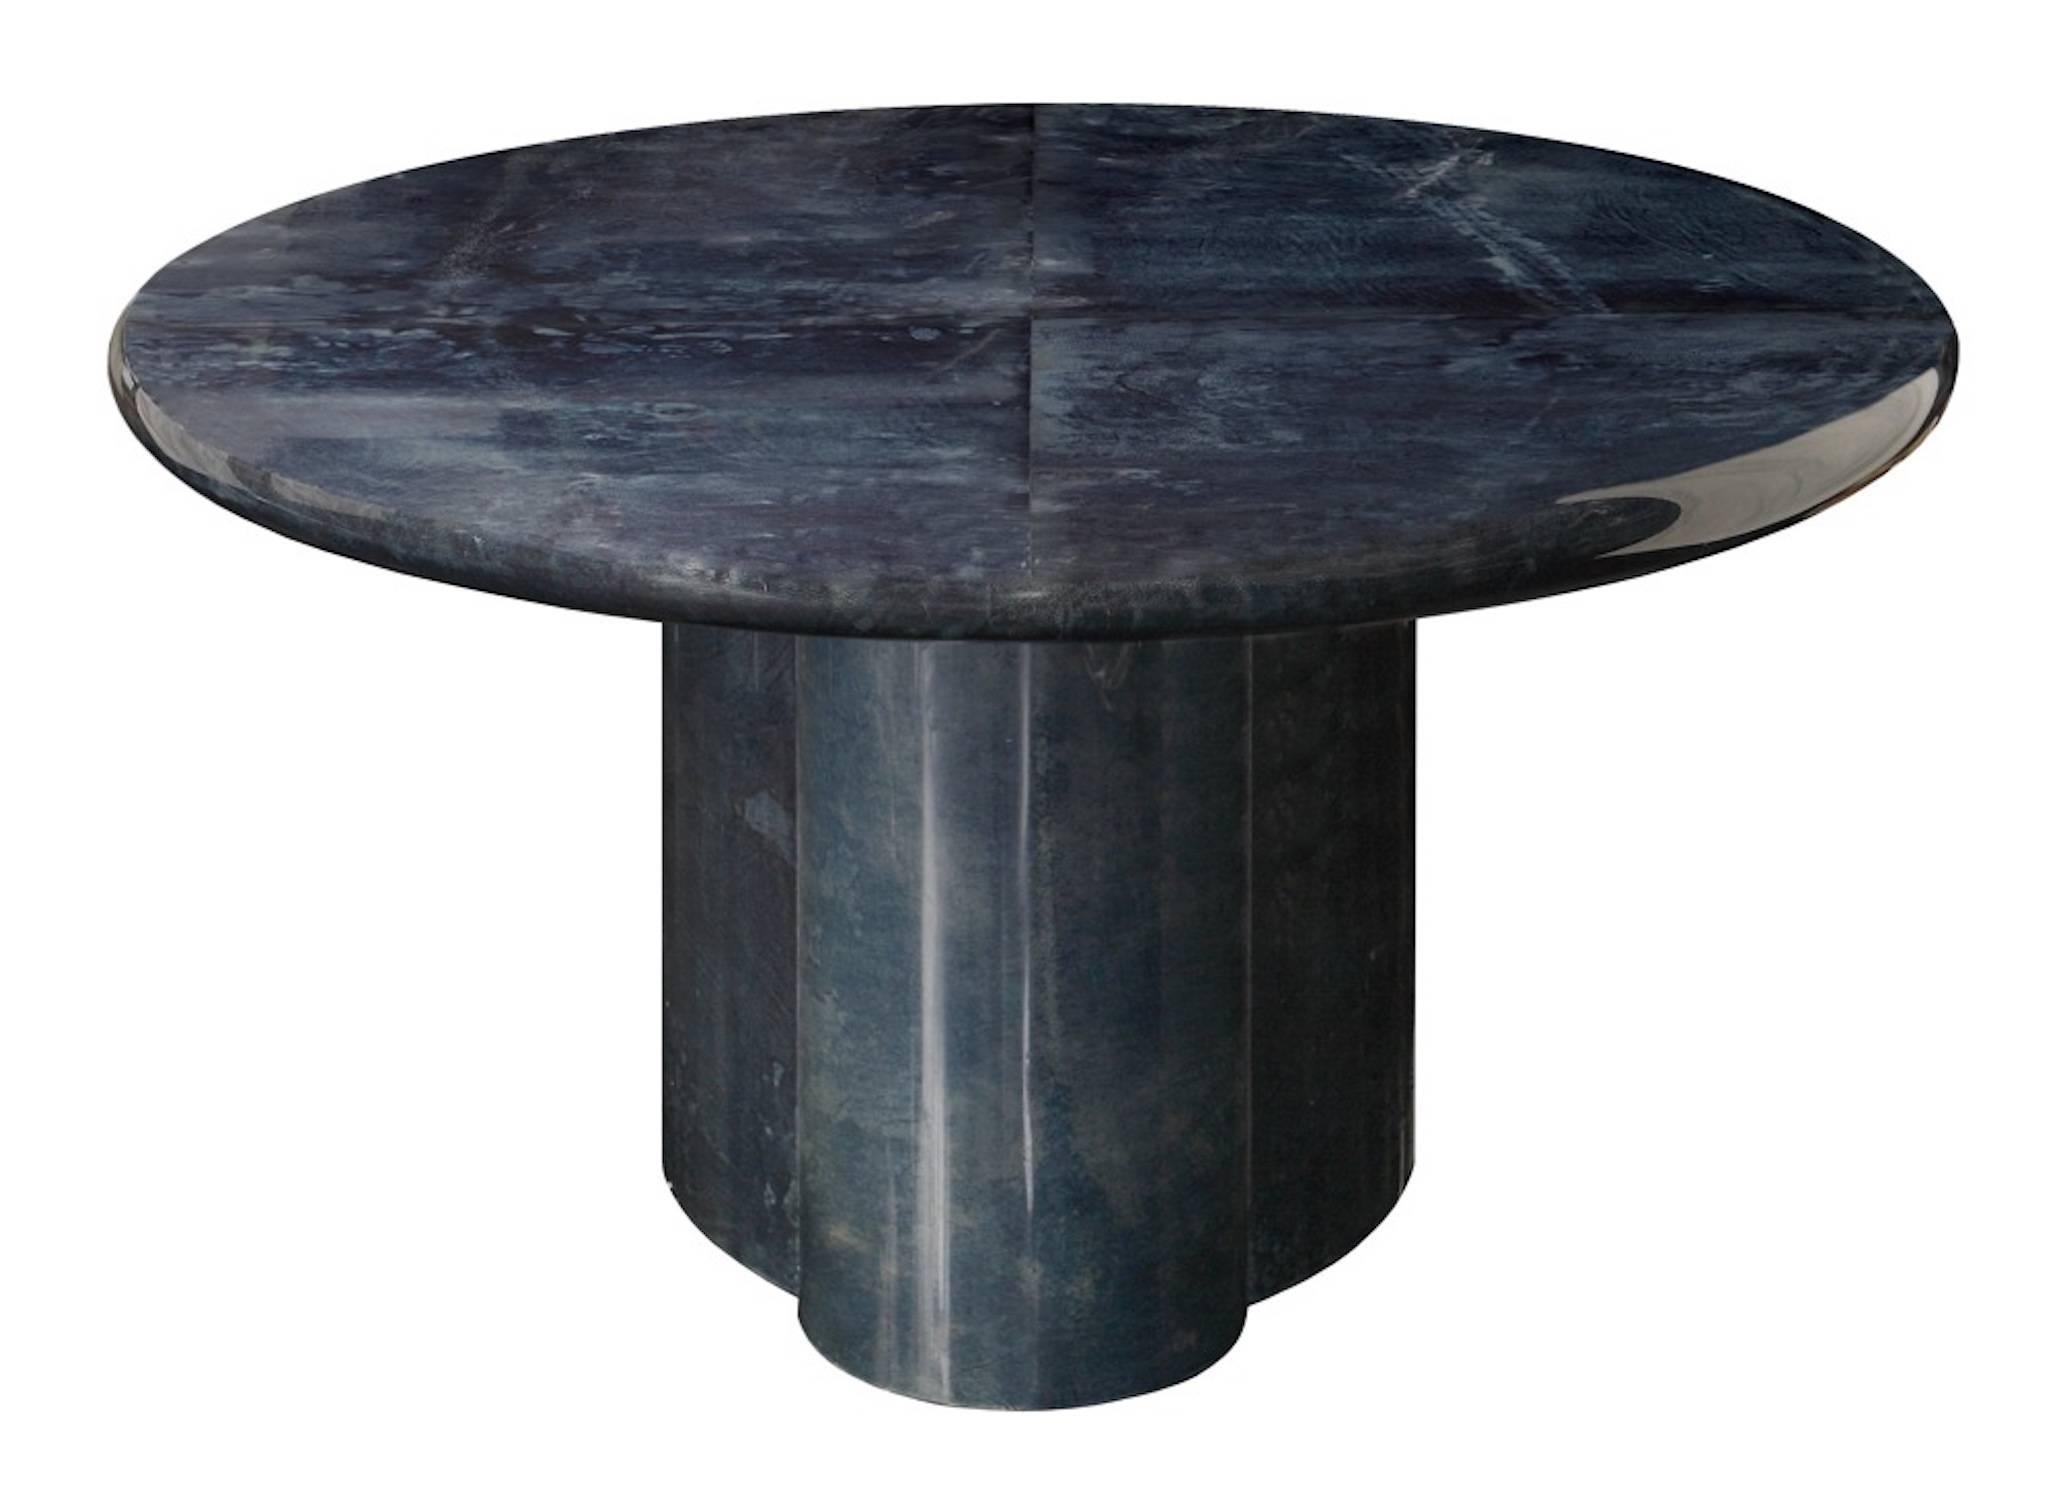 Oval dining table in parchment goatskin color Peacock Blue attributed to Aldo Tura, circa 1970.
Oval top with rounded corners and flower shaped base, entirely covered in parchment goatskin color peacock blue. Wooden structure.
It can allow up to